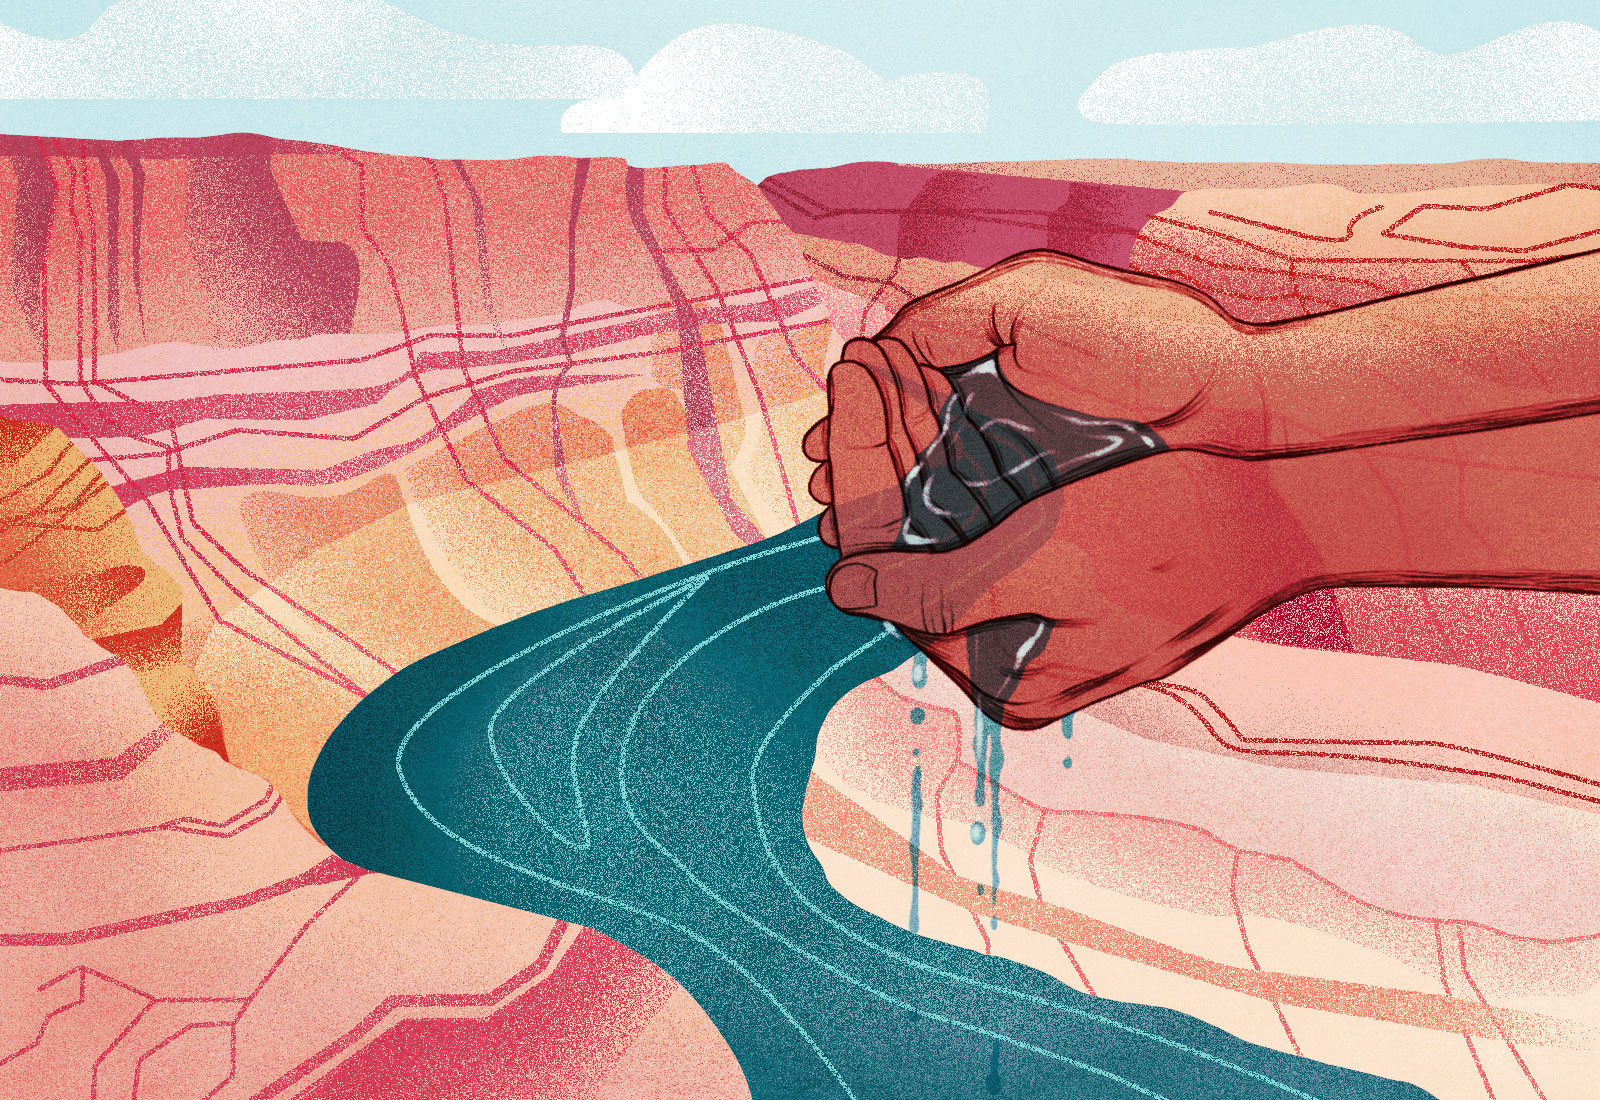 Illustration: Hands collect water flowing into the Colorado River, with a rock in the background.